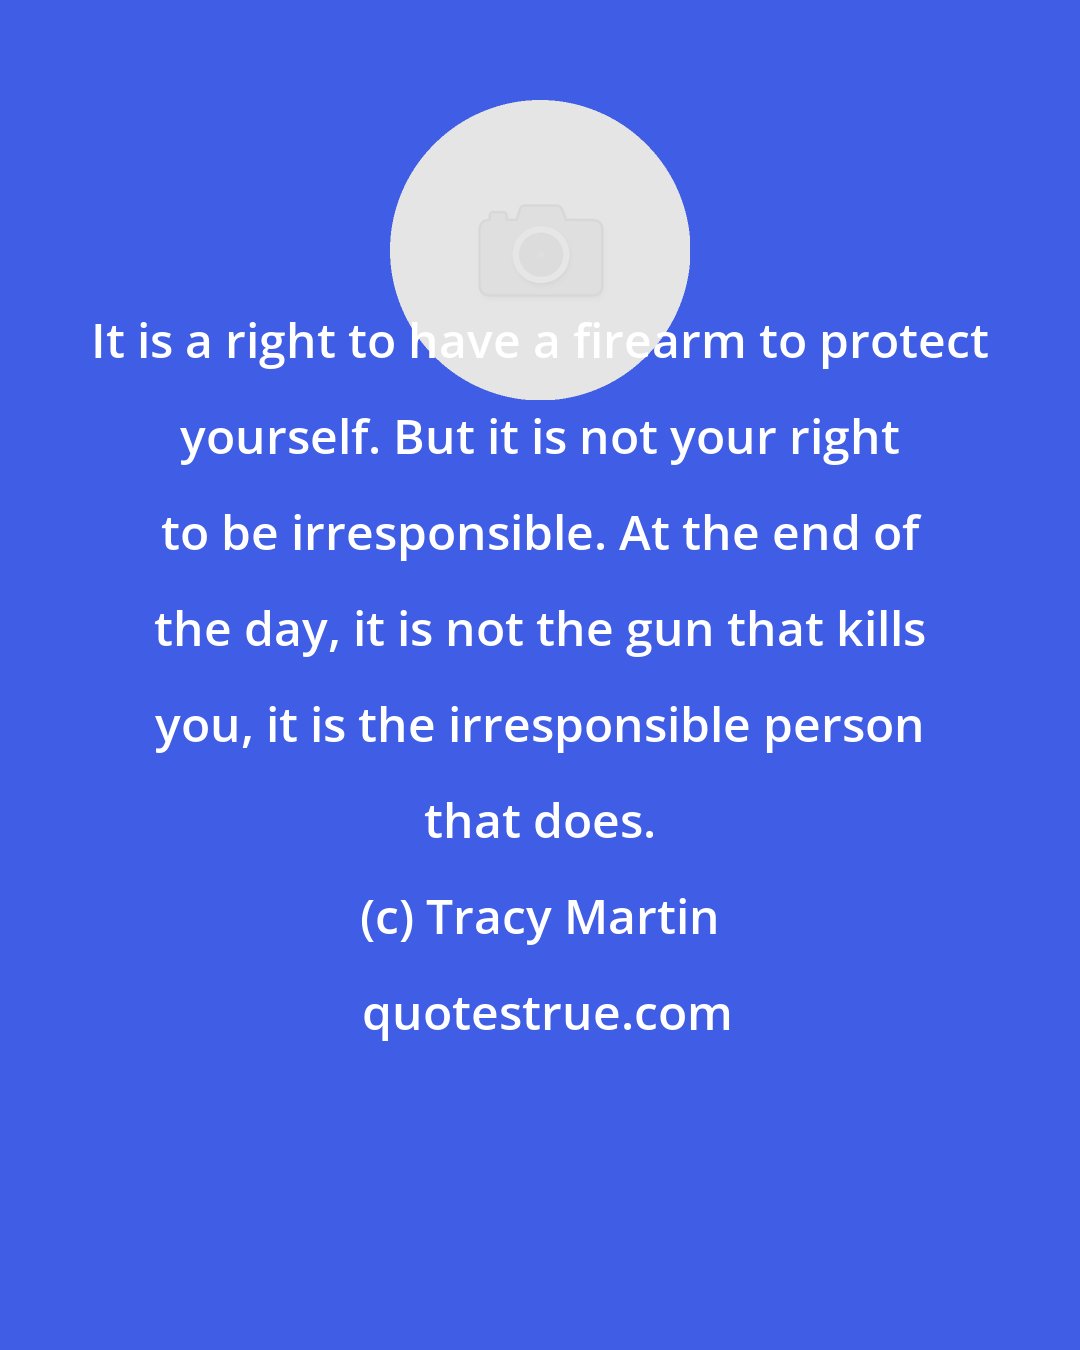 Tracy Martin: It is a right to have a firearm to protect yourself. But it is not your right to be irresponsible. At the end of the day, it is not the gun that kills you, it is the irresponsible person that does.